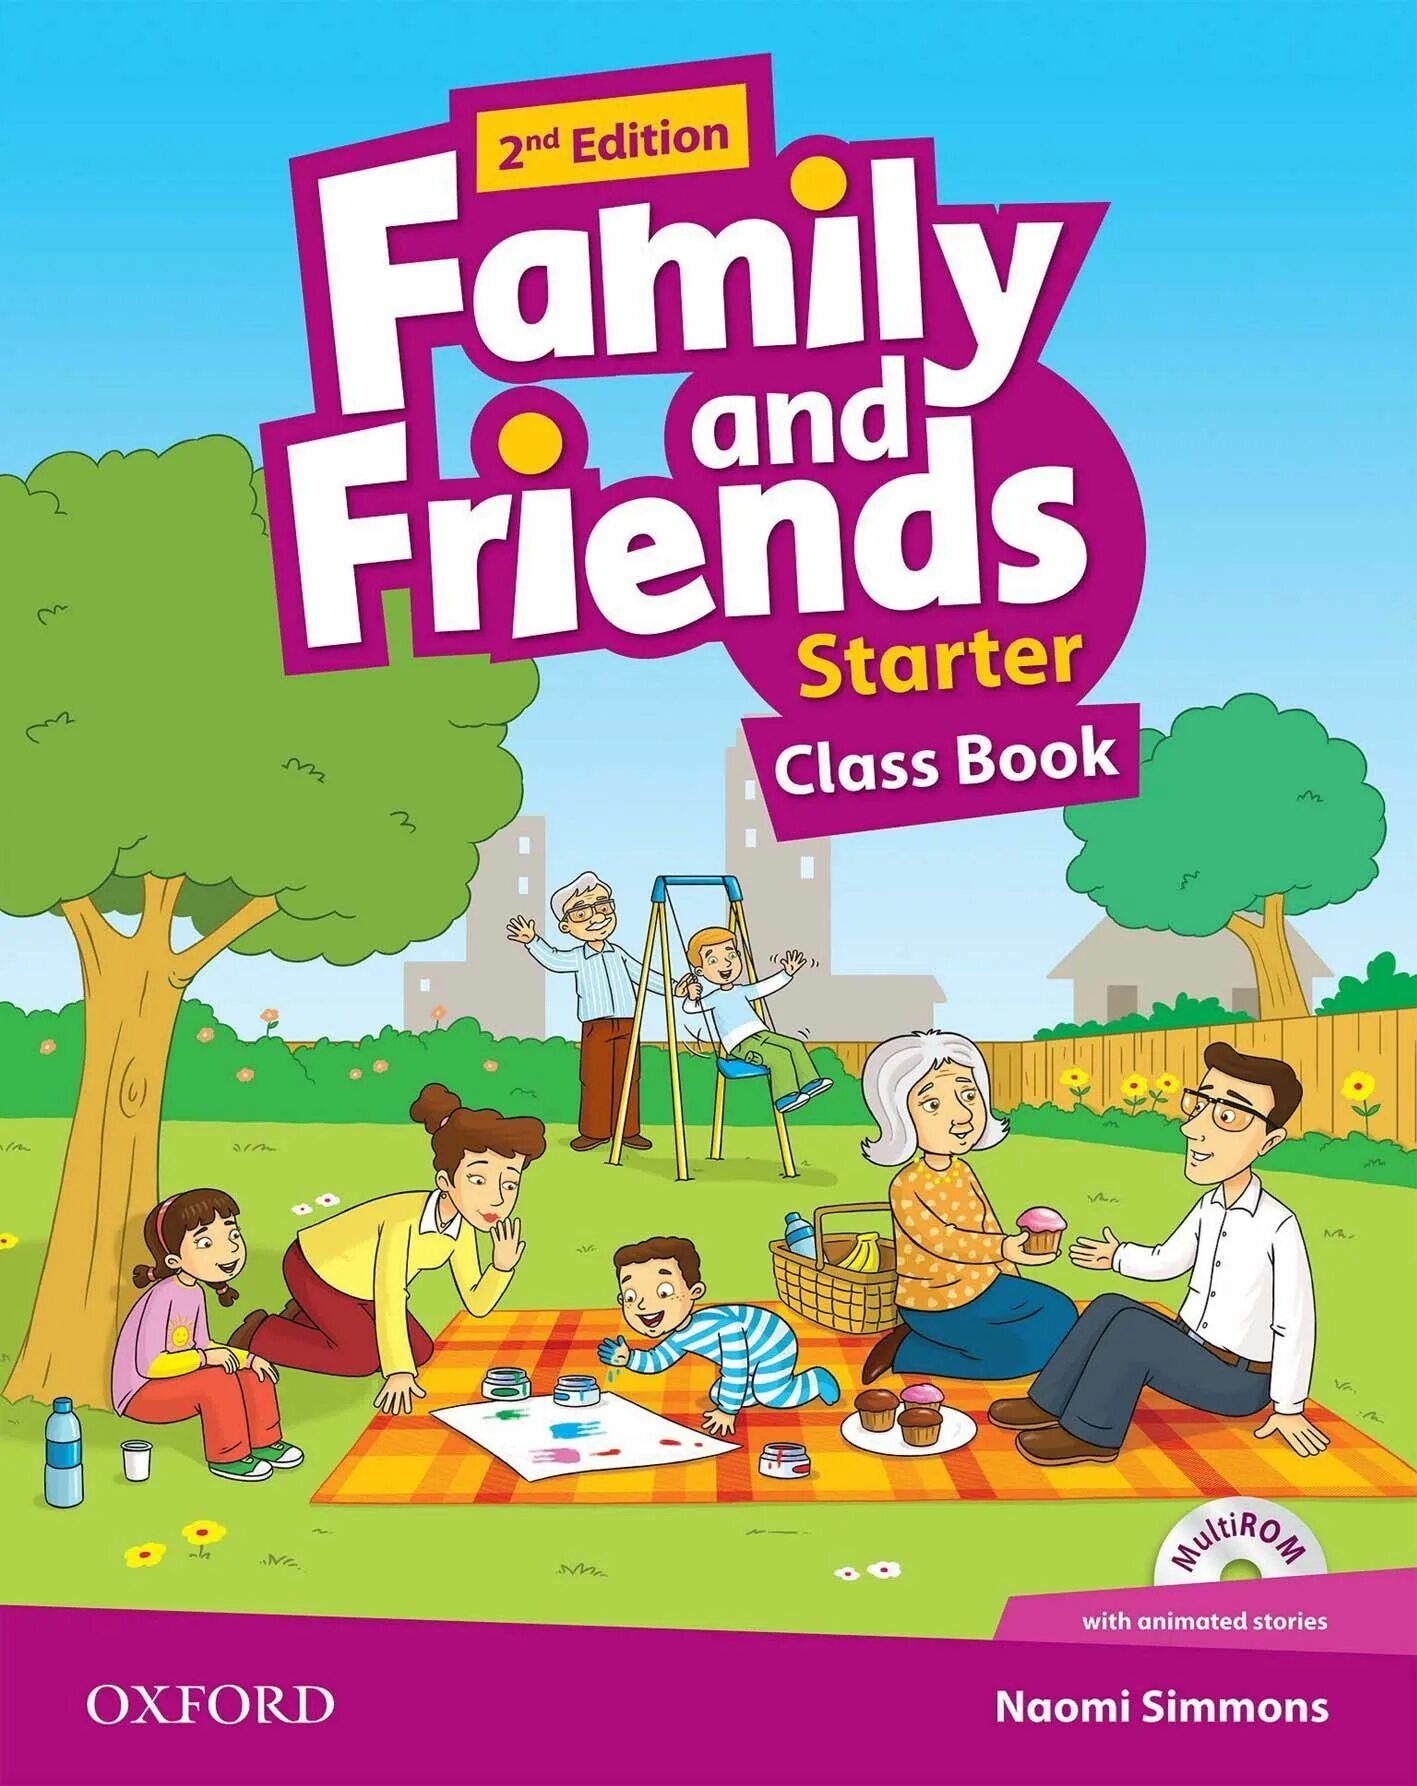 Family and friends 2 Edition Classbook. Family and friends 2 class book Starter. Учебник Oxford Family and friends 2. 2nd Edition Family and friends Starter Workbook. Family and friends projects